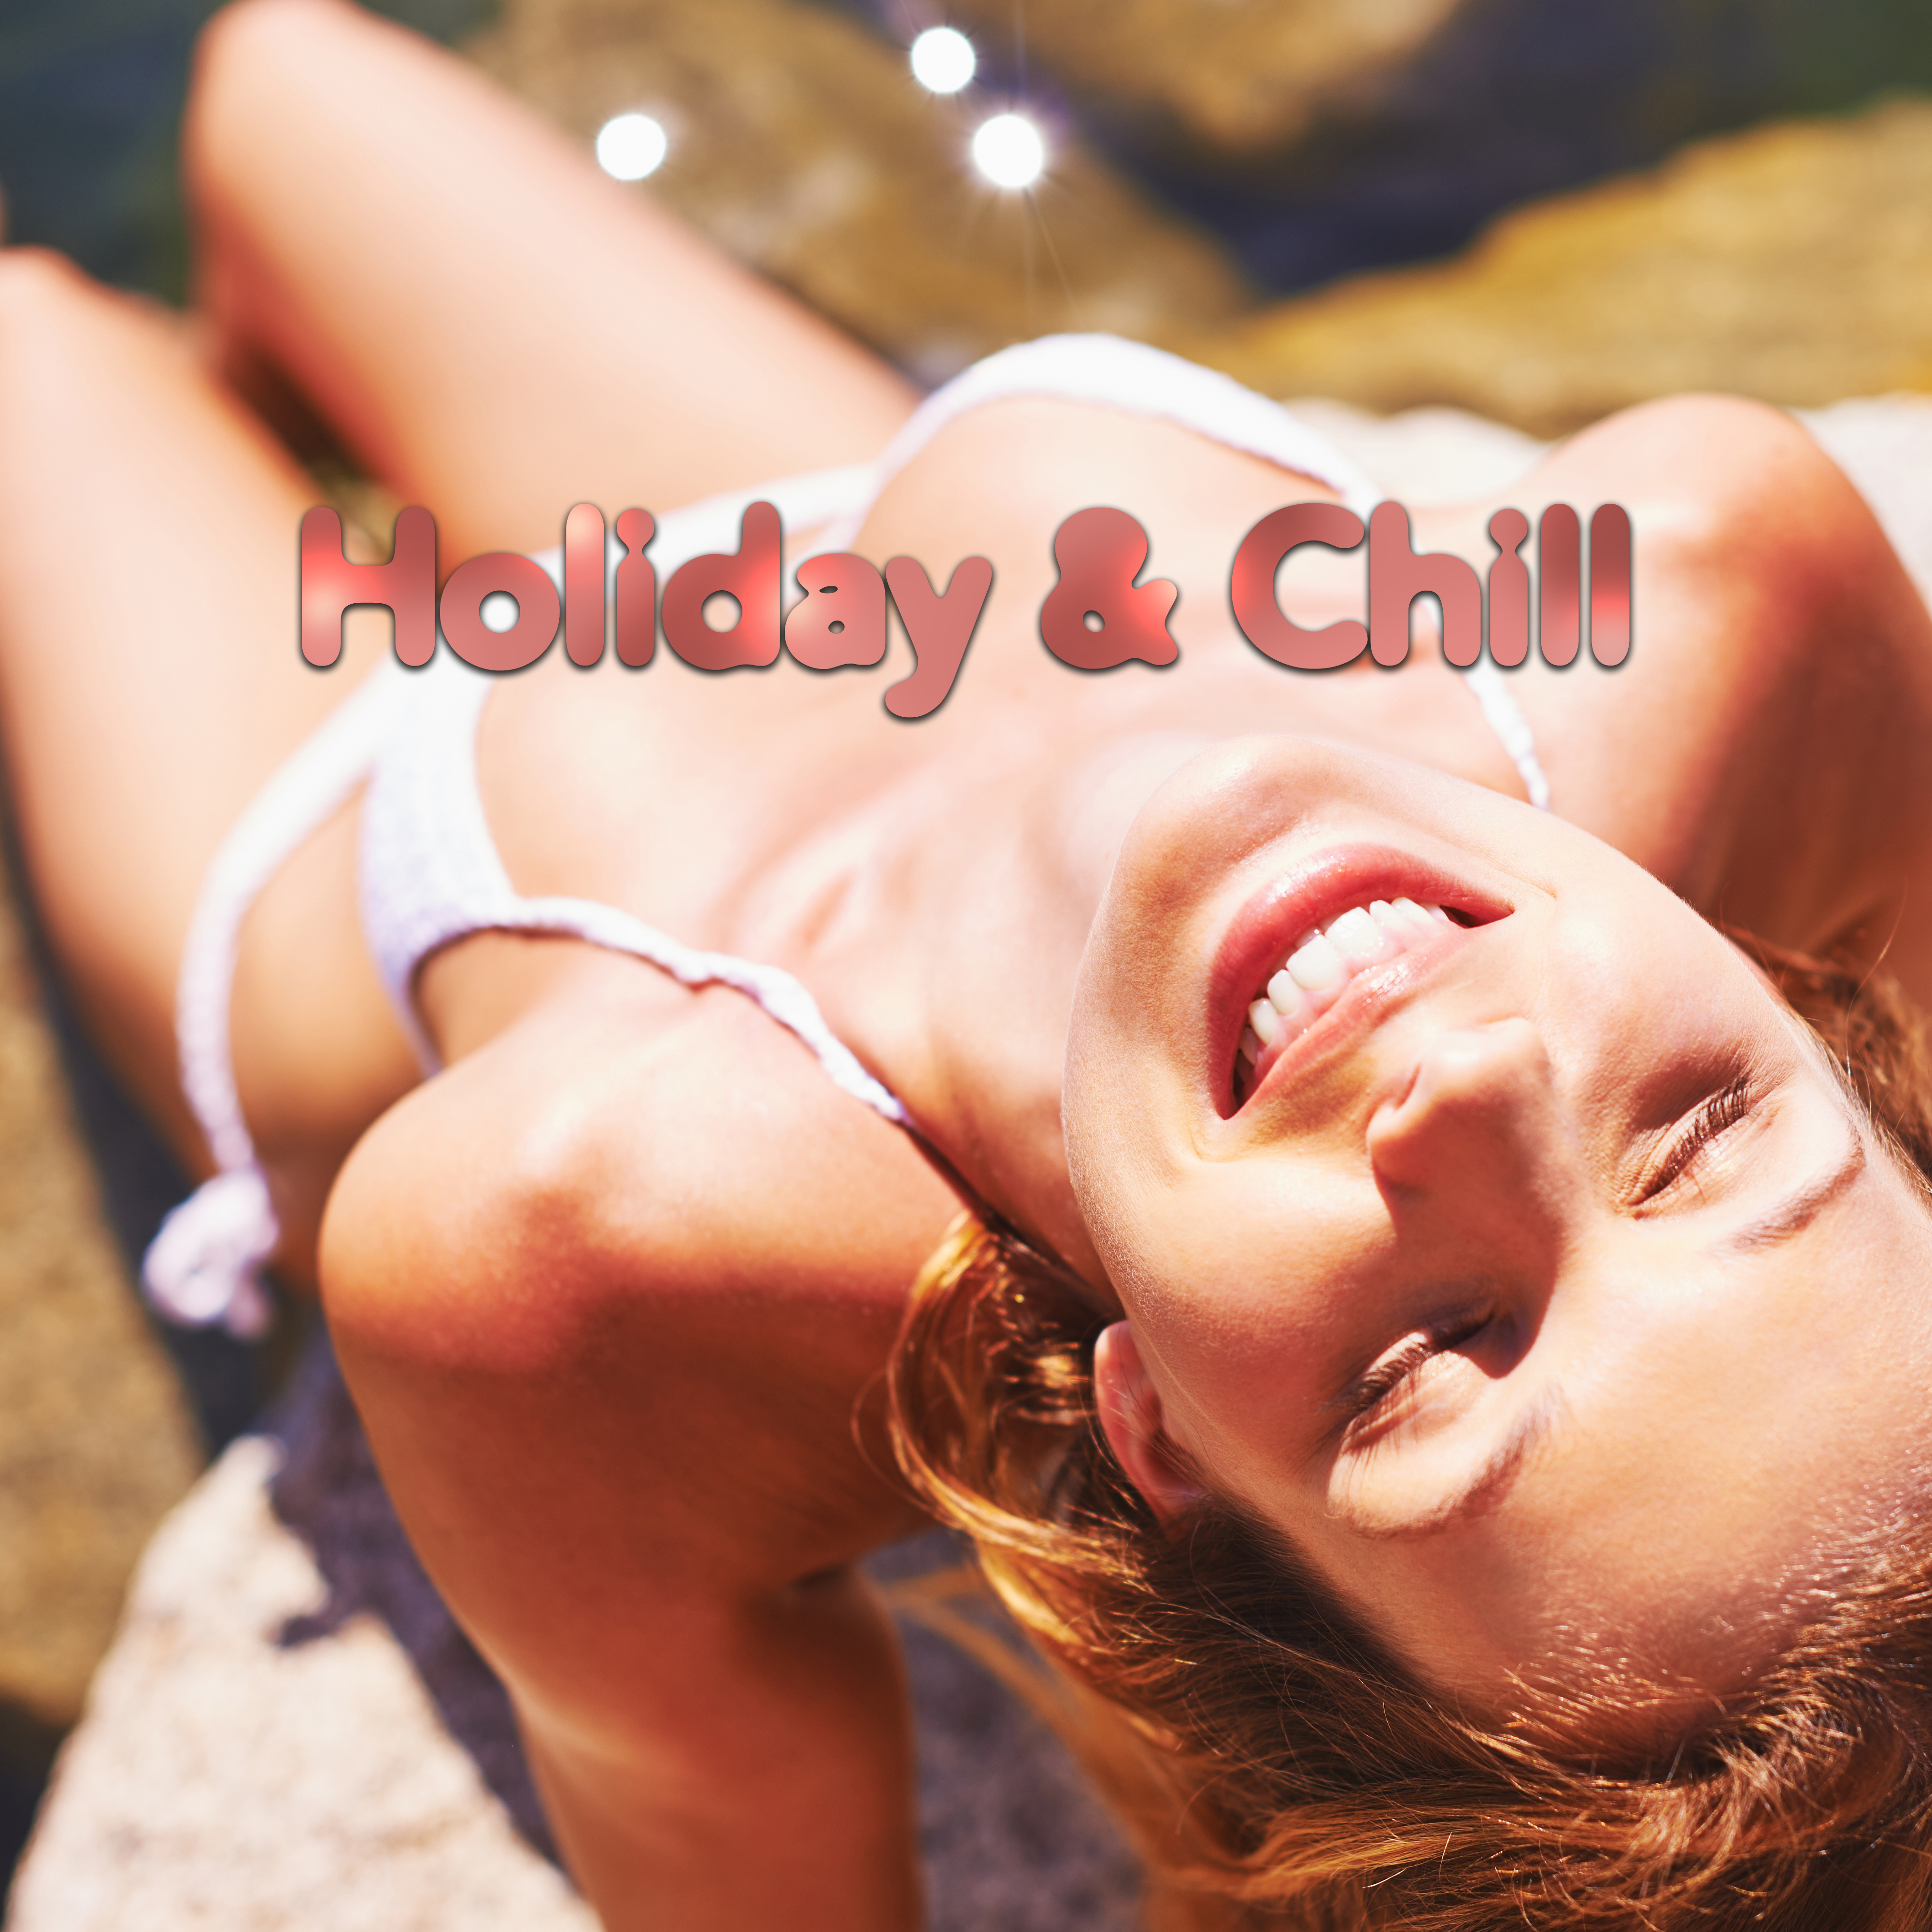 Holiday & Chill – Best Music for Relaxation, Lounge Summer, Super Party Time, Ibiza Poolside